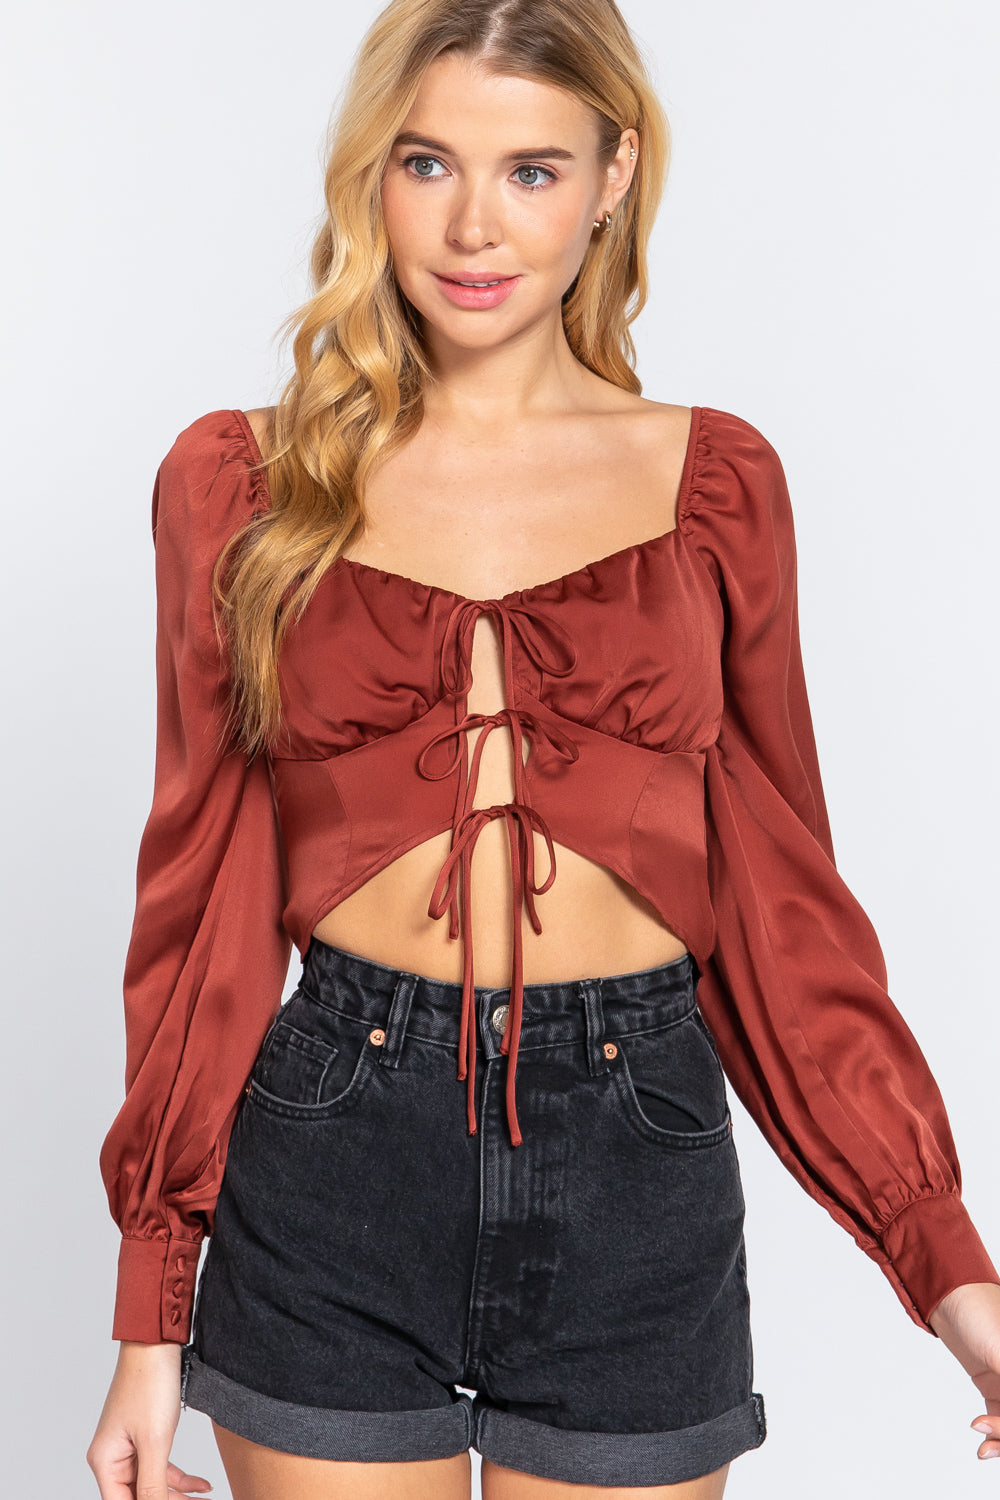 Long Sleeve Sweetheart Neck Front Ribbon Tie Detail Woven Top in Rust